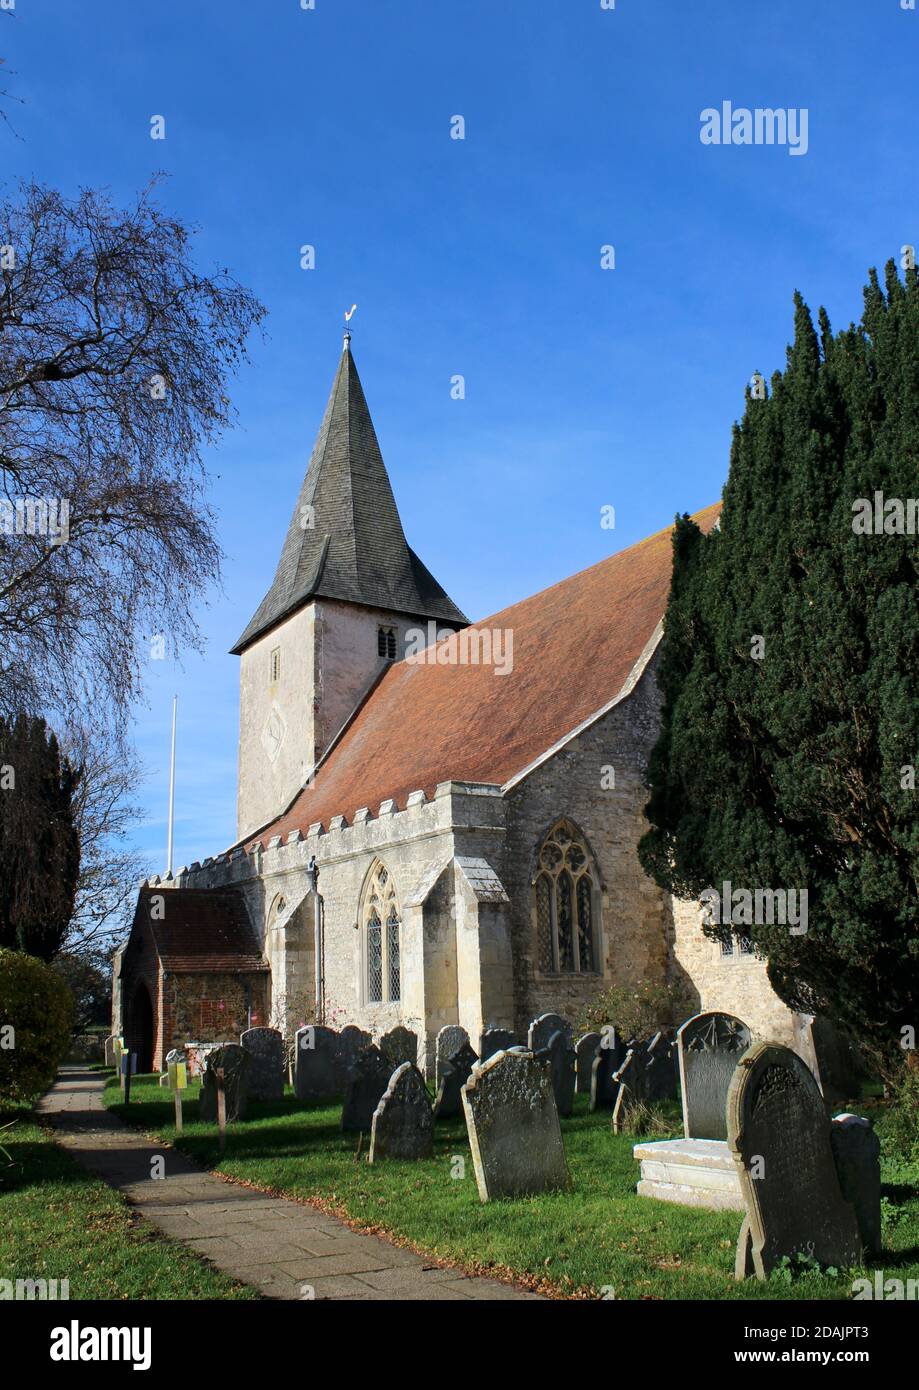 The Holy Trinity Chuch, Bosham, Chichester, West Sussex. A local landmark and the church featured on the Bayeux Tapestry. A popular visitor attraction. Stock Photo